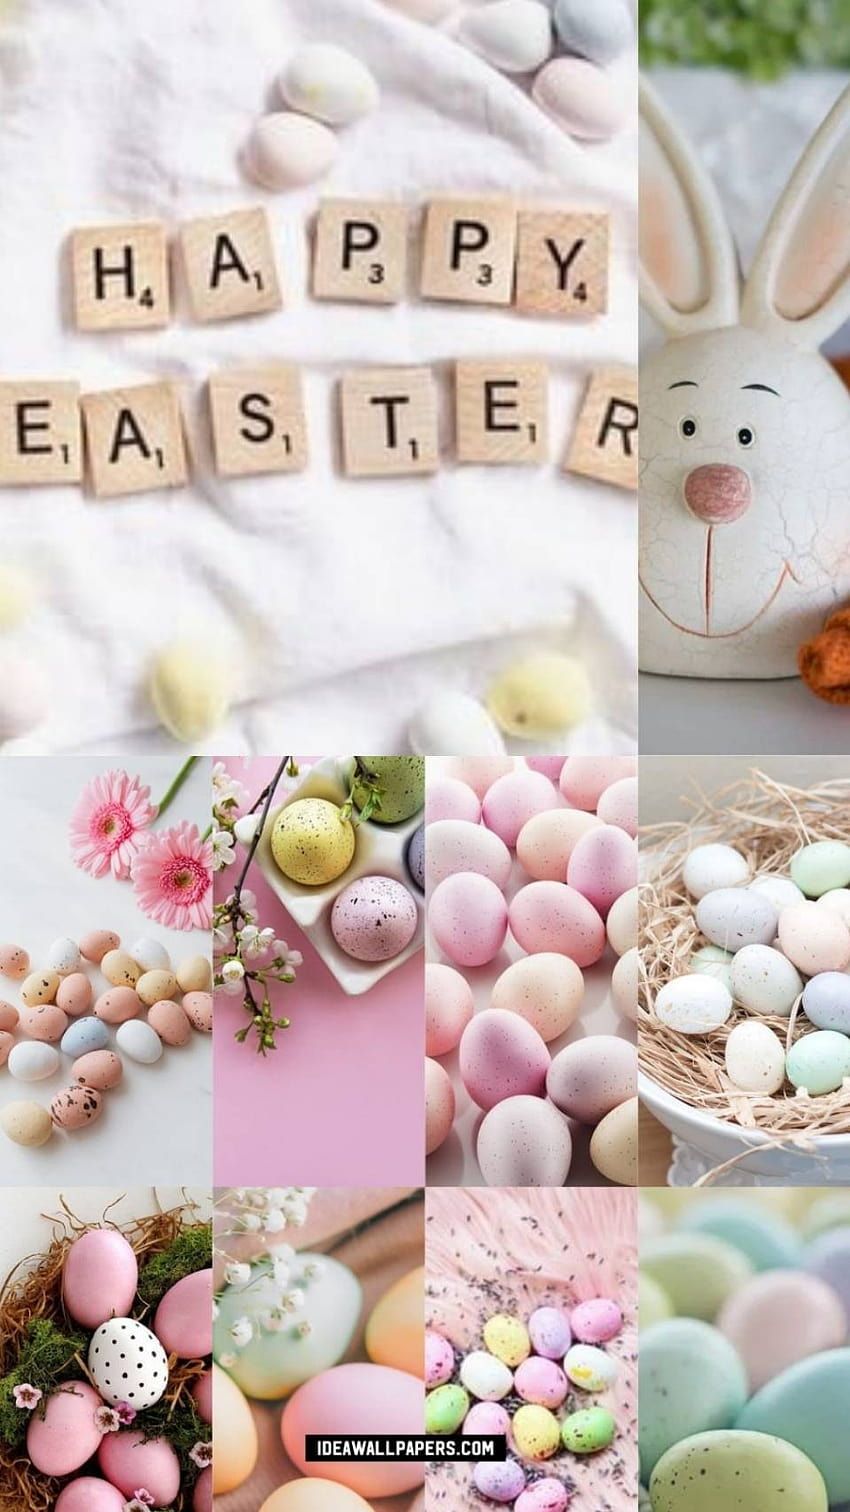 Happy easter 2019 images, pictures & wallpapers - Easter